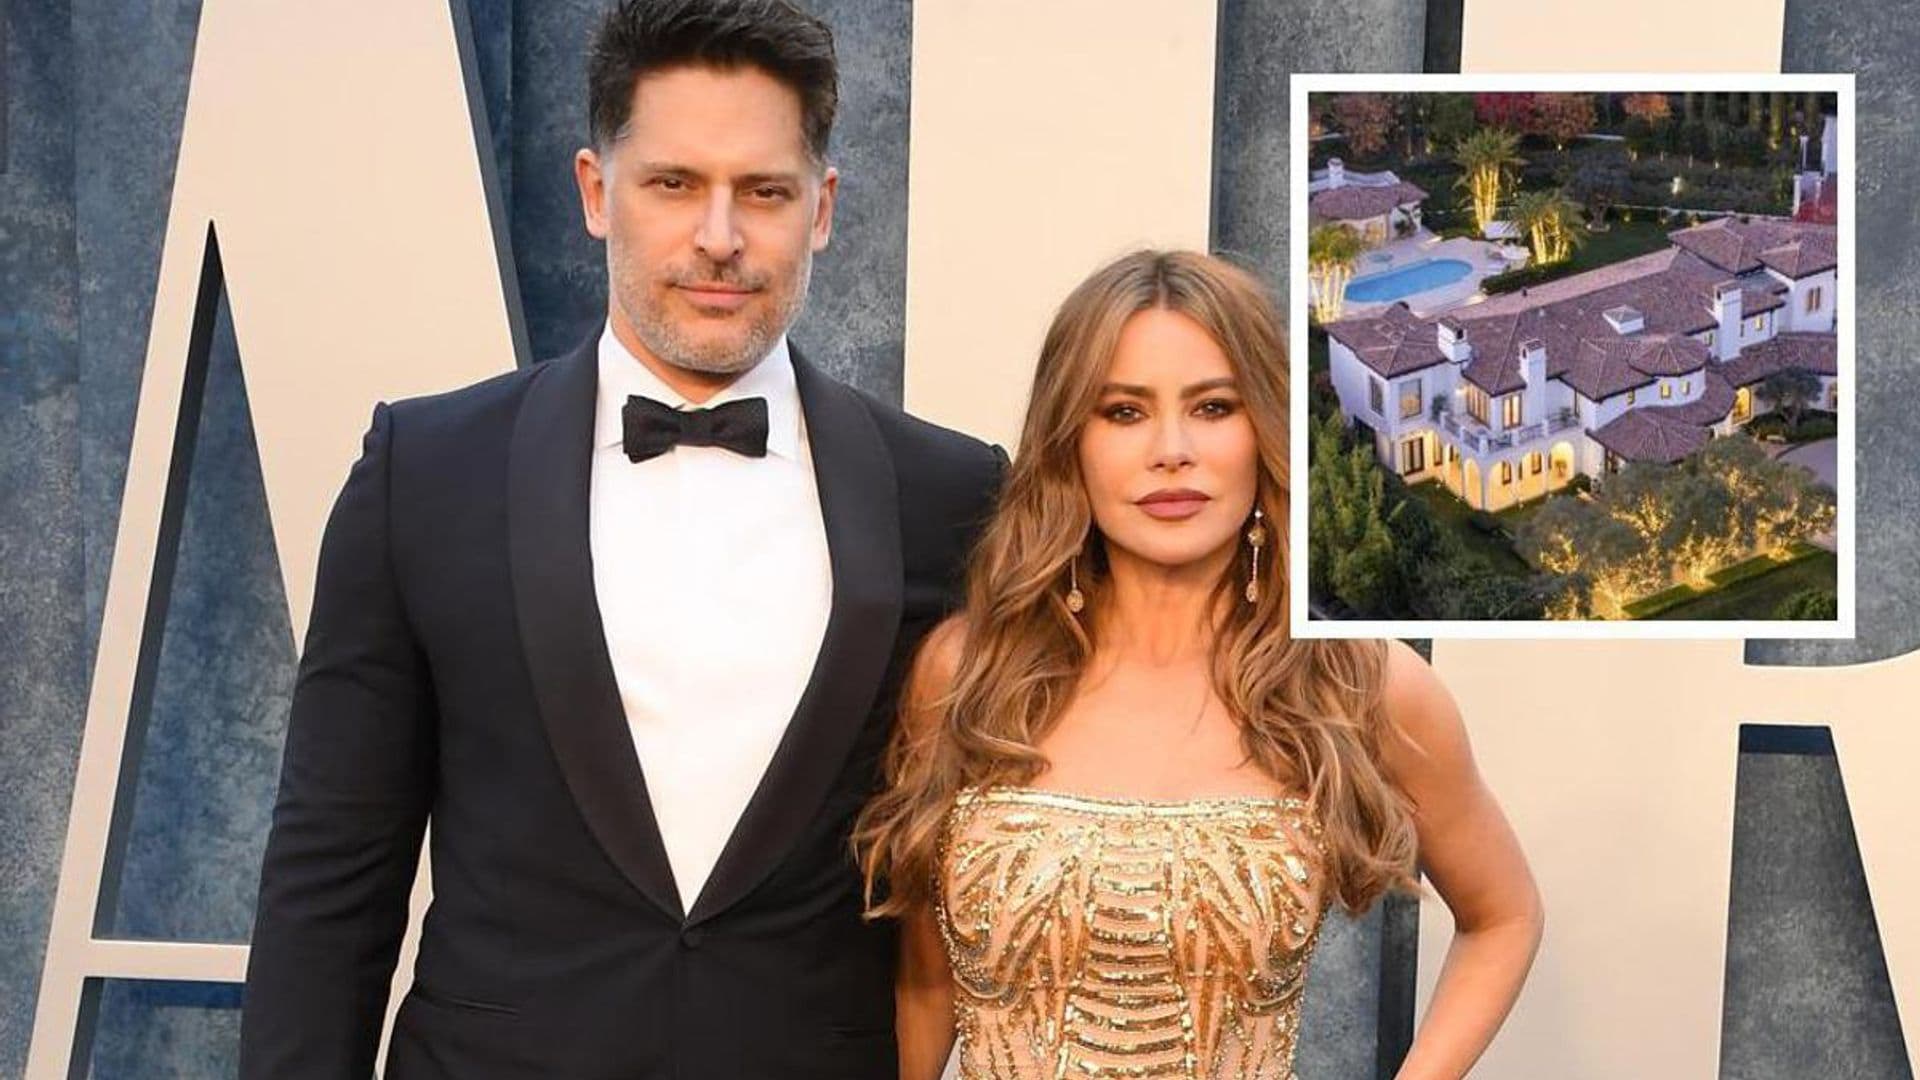 Sofia Vergara and Joe Manganiello moving on after selling their Los Angeles mansion